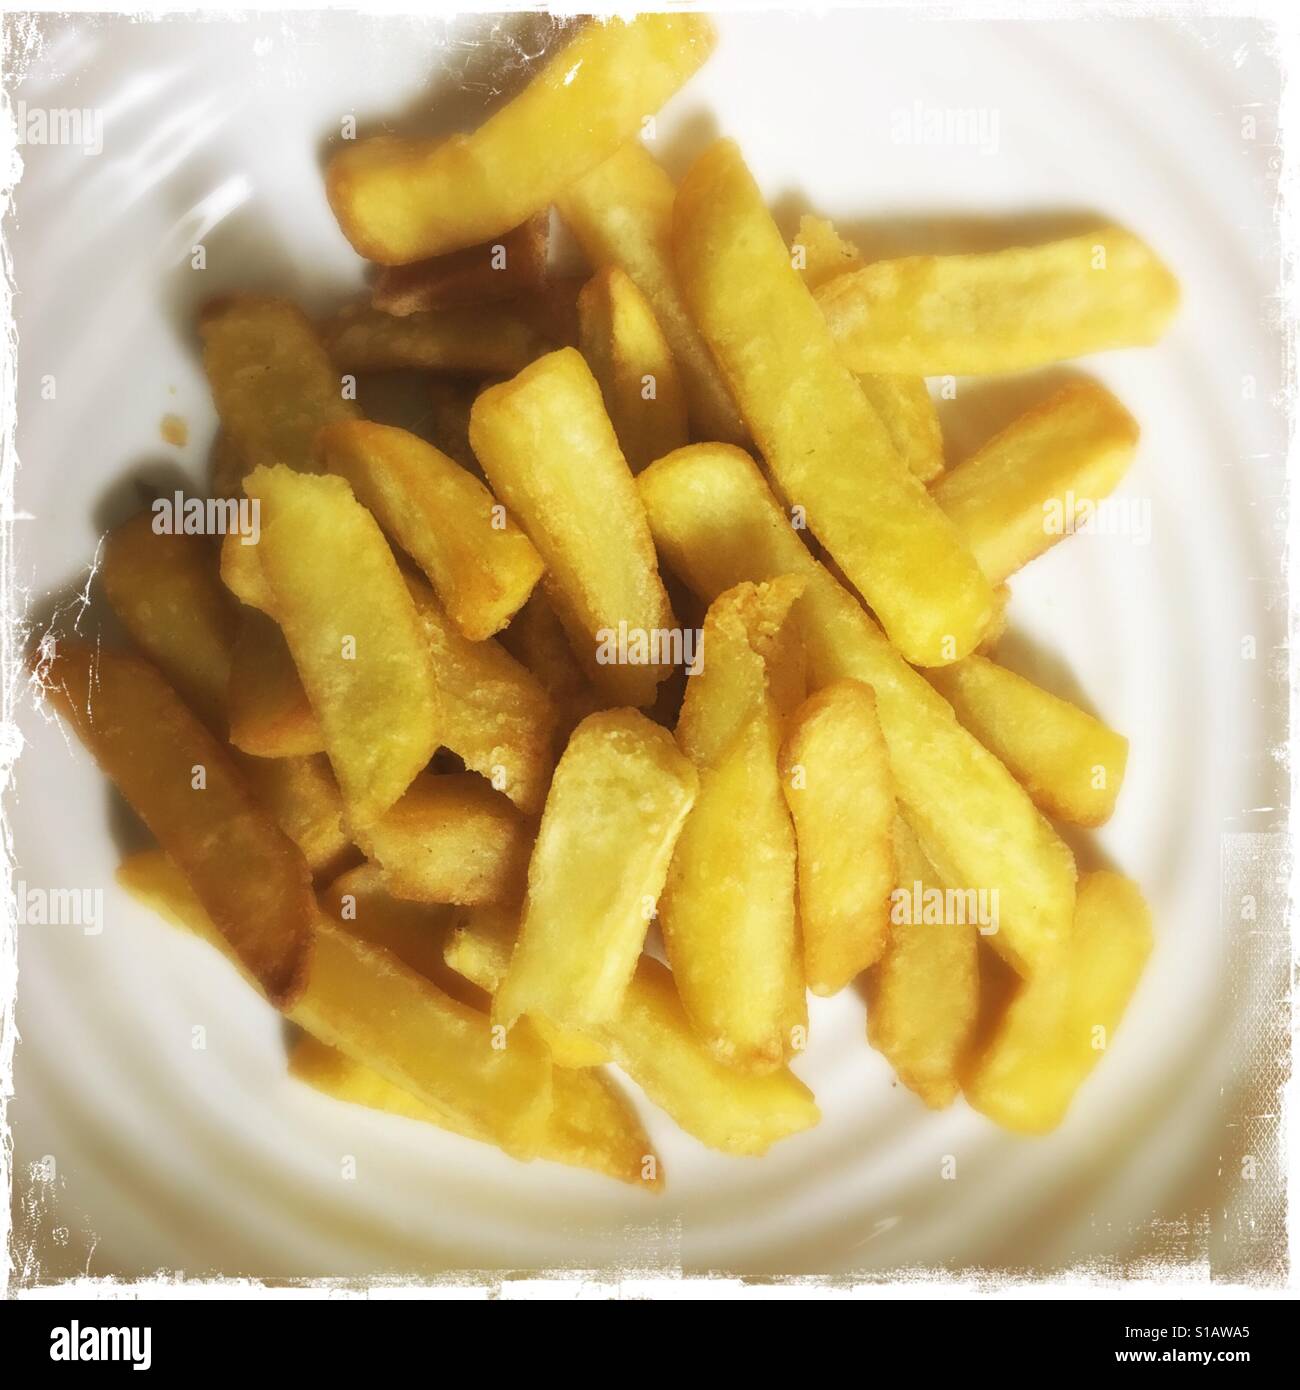 Bowl of golden coloured chips Stock Photo